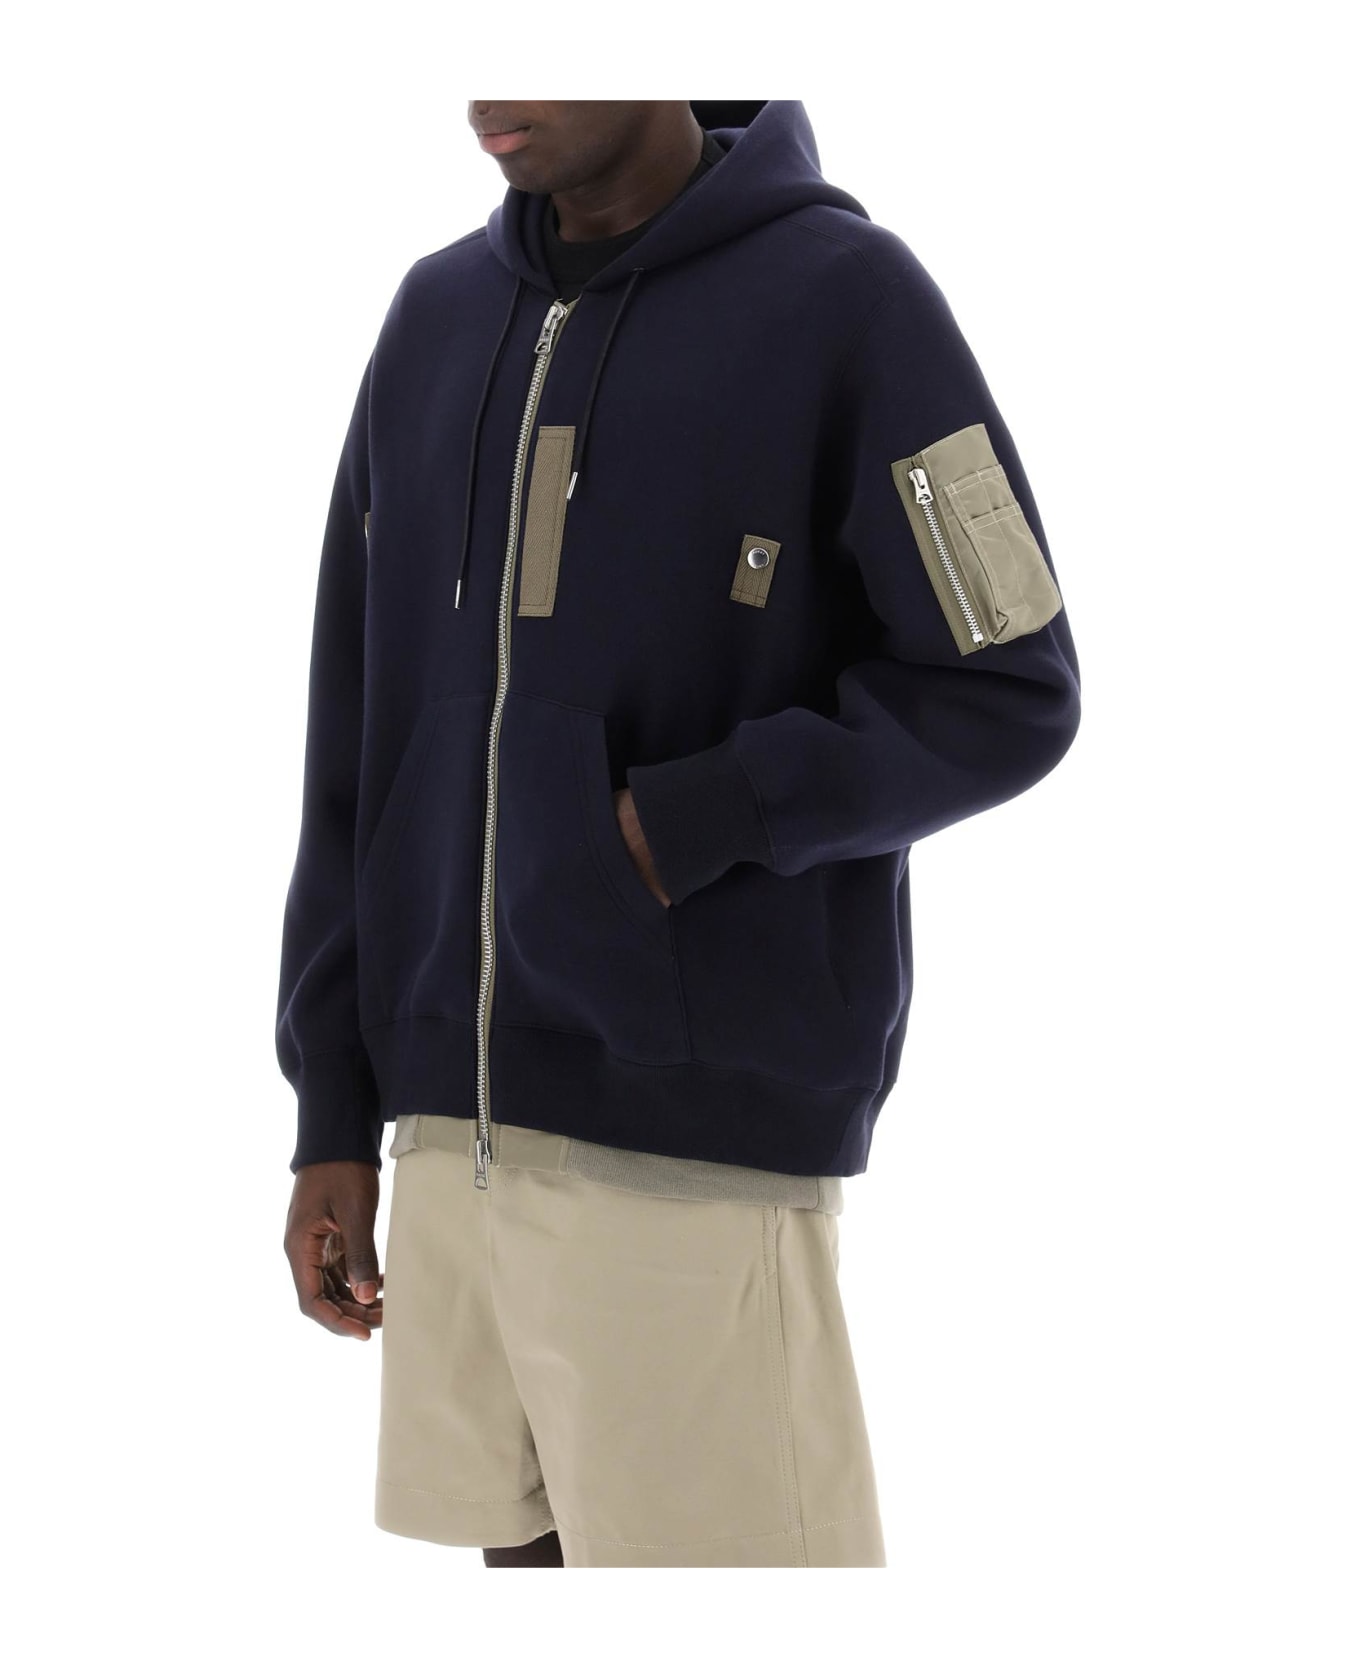 Sacai Full Zip Hoodie With Contrast Trims - NAVY (Blue)